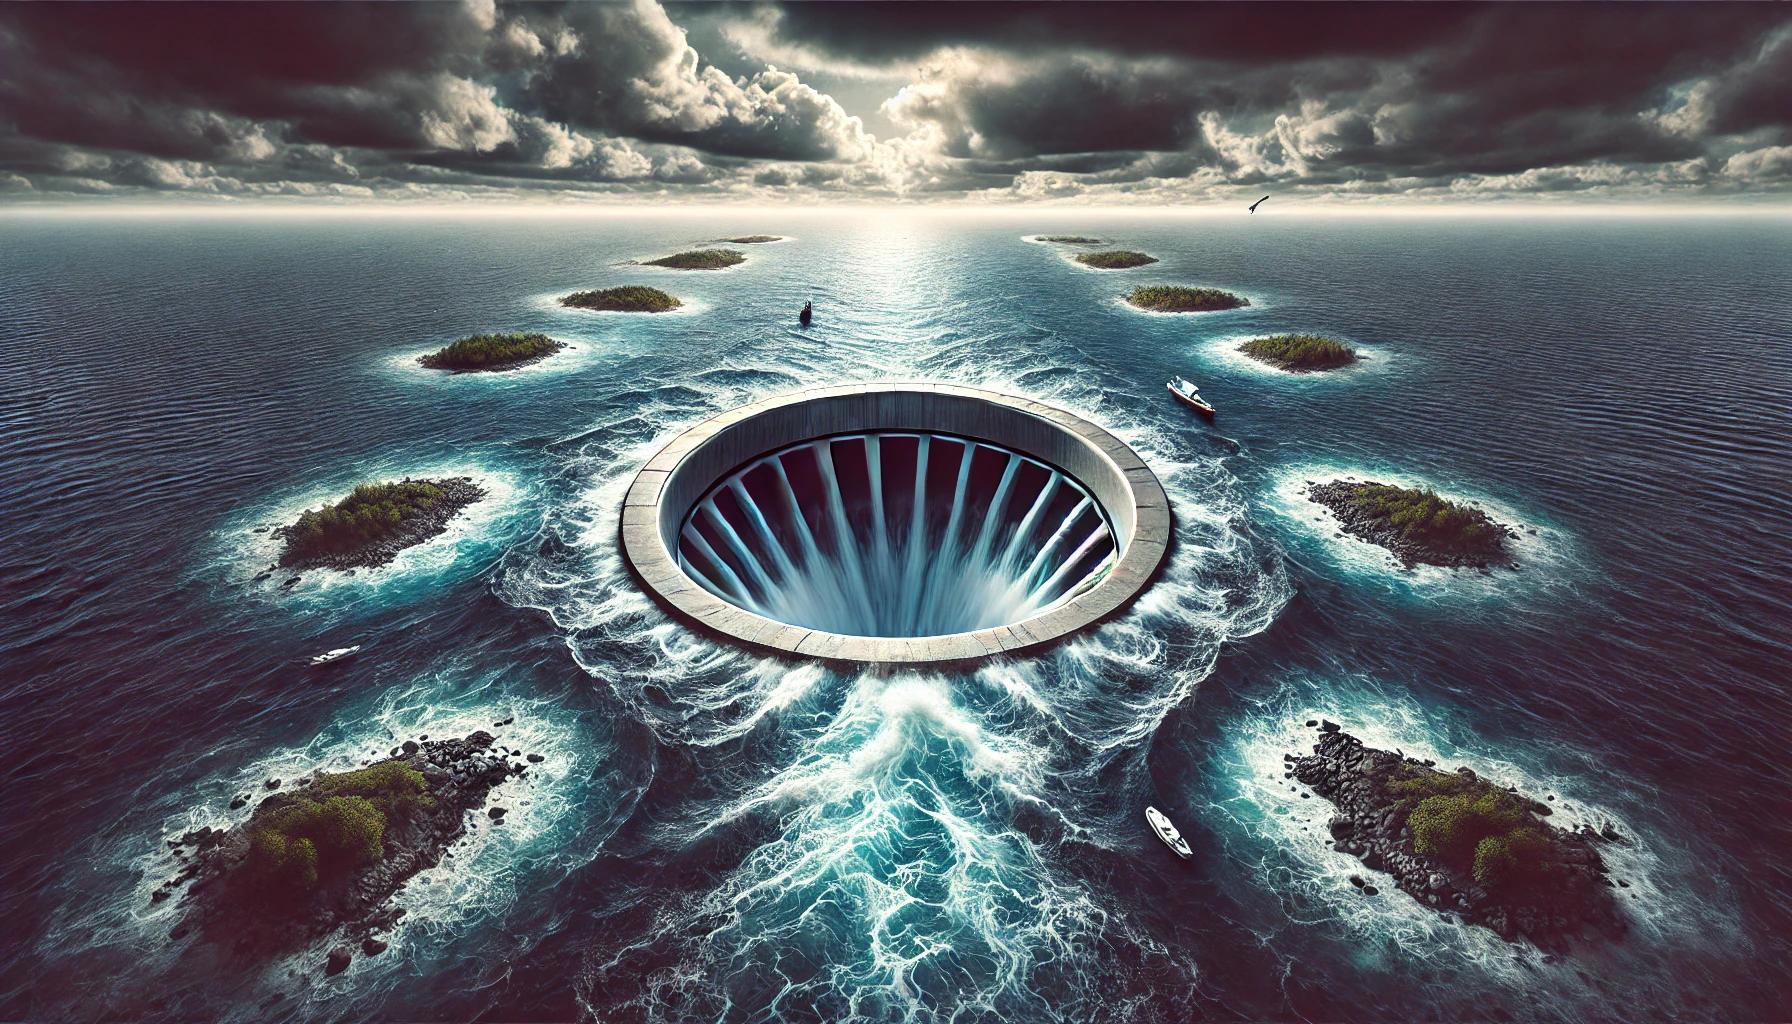 What if you drained the oceans?